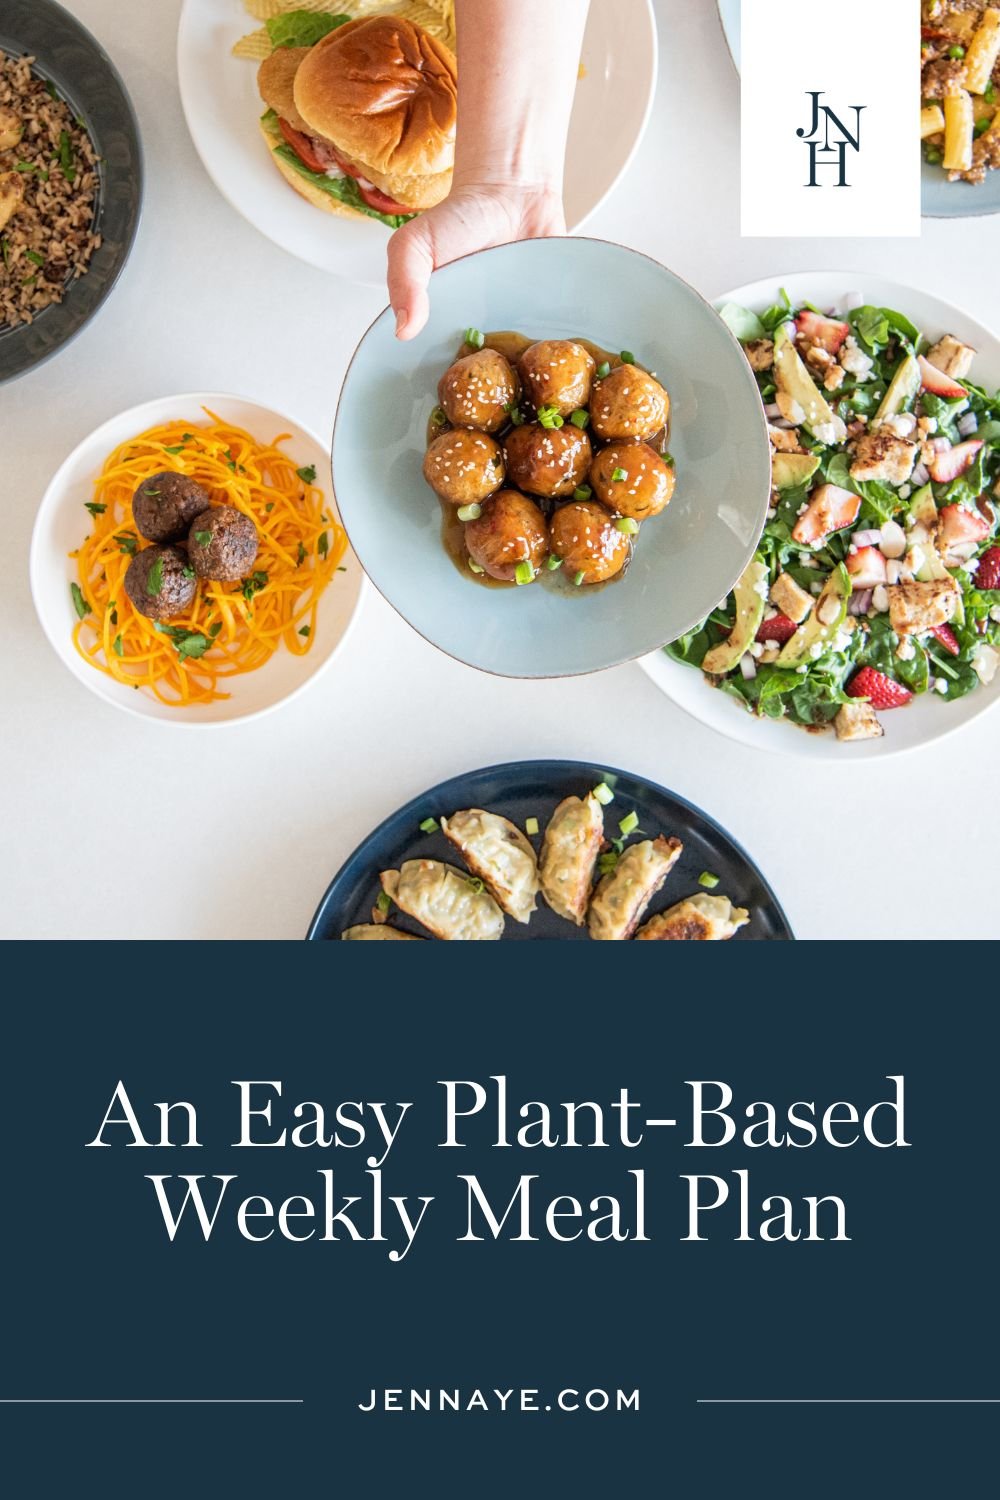 How to Meal Prep for a Week of Plant-Based Eating